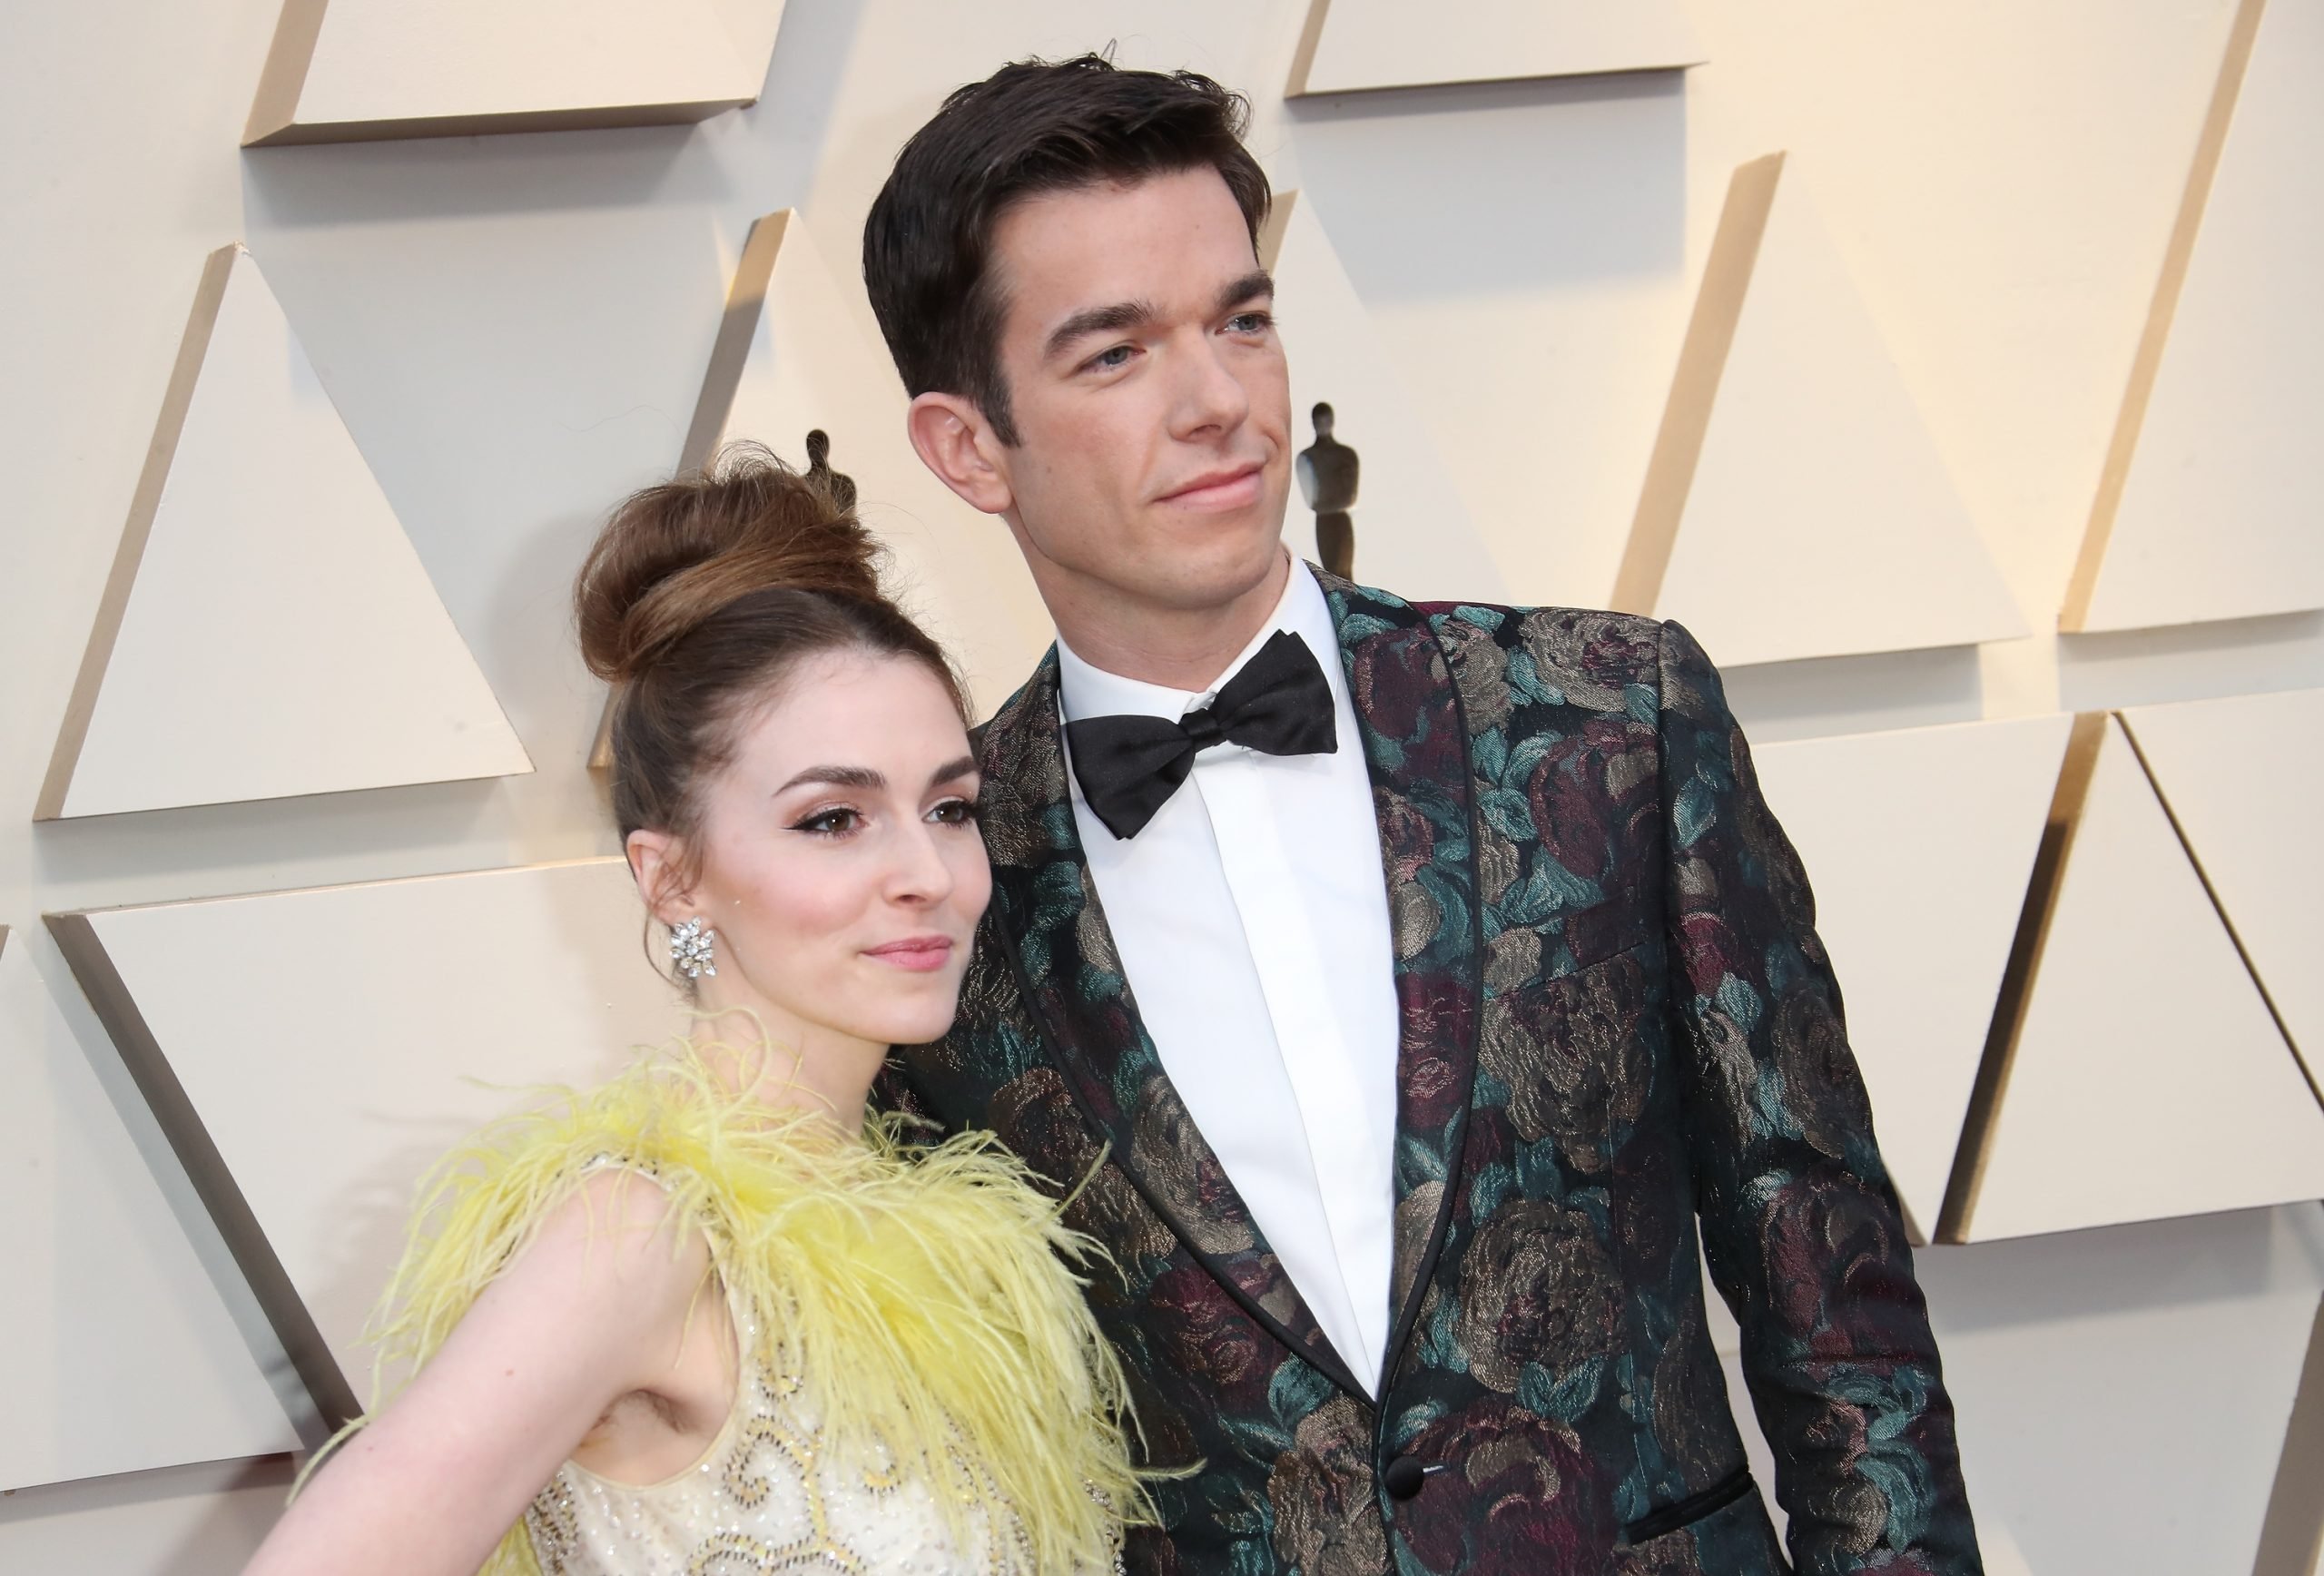 Annamarie Tendler and John Mulaney attend the 91st Academy Awards in Hollywood